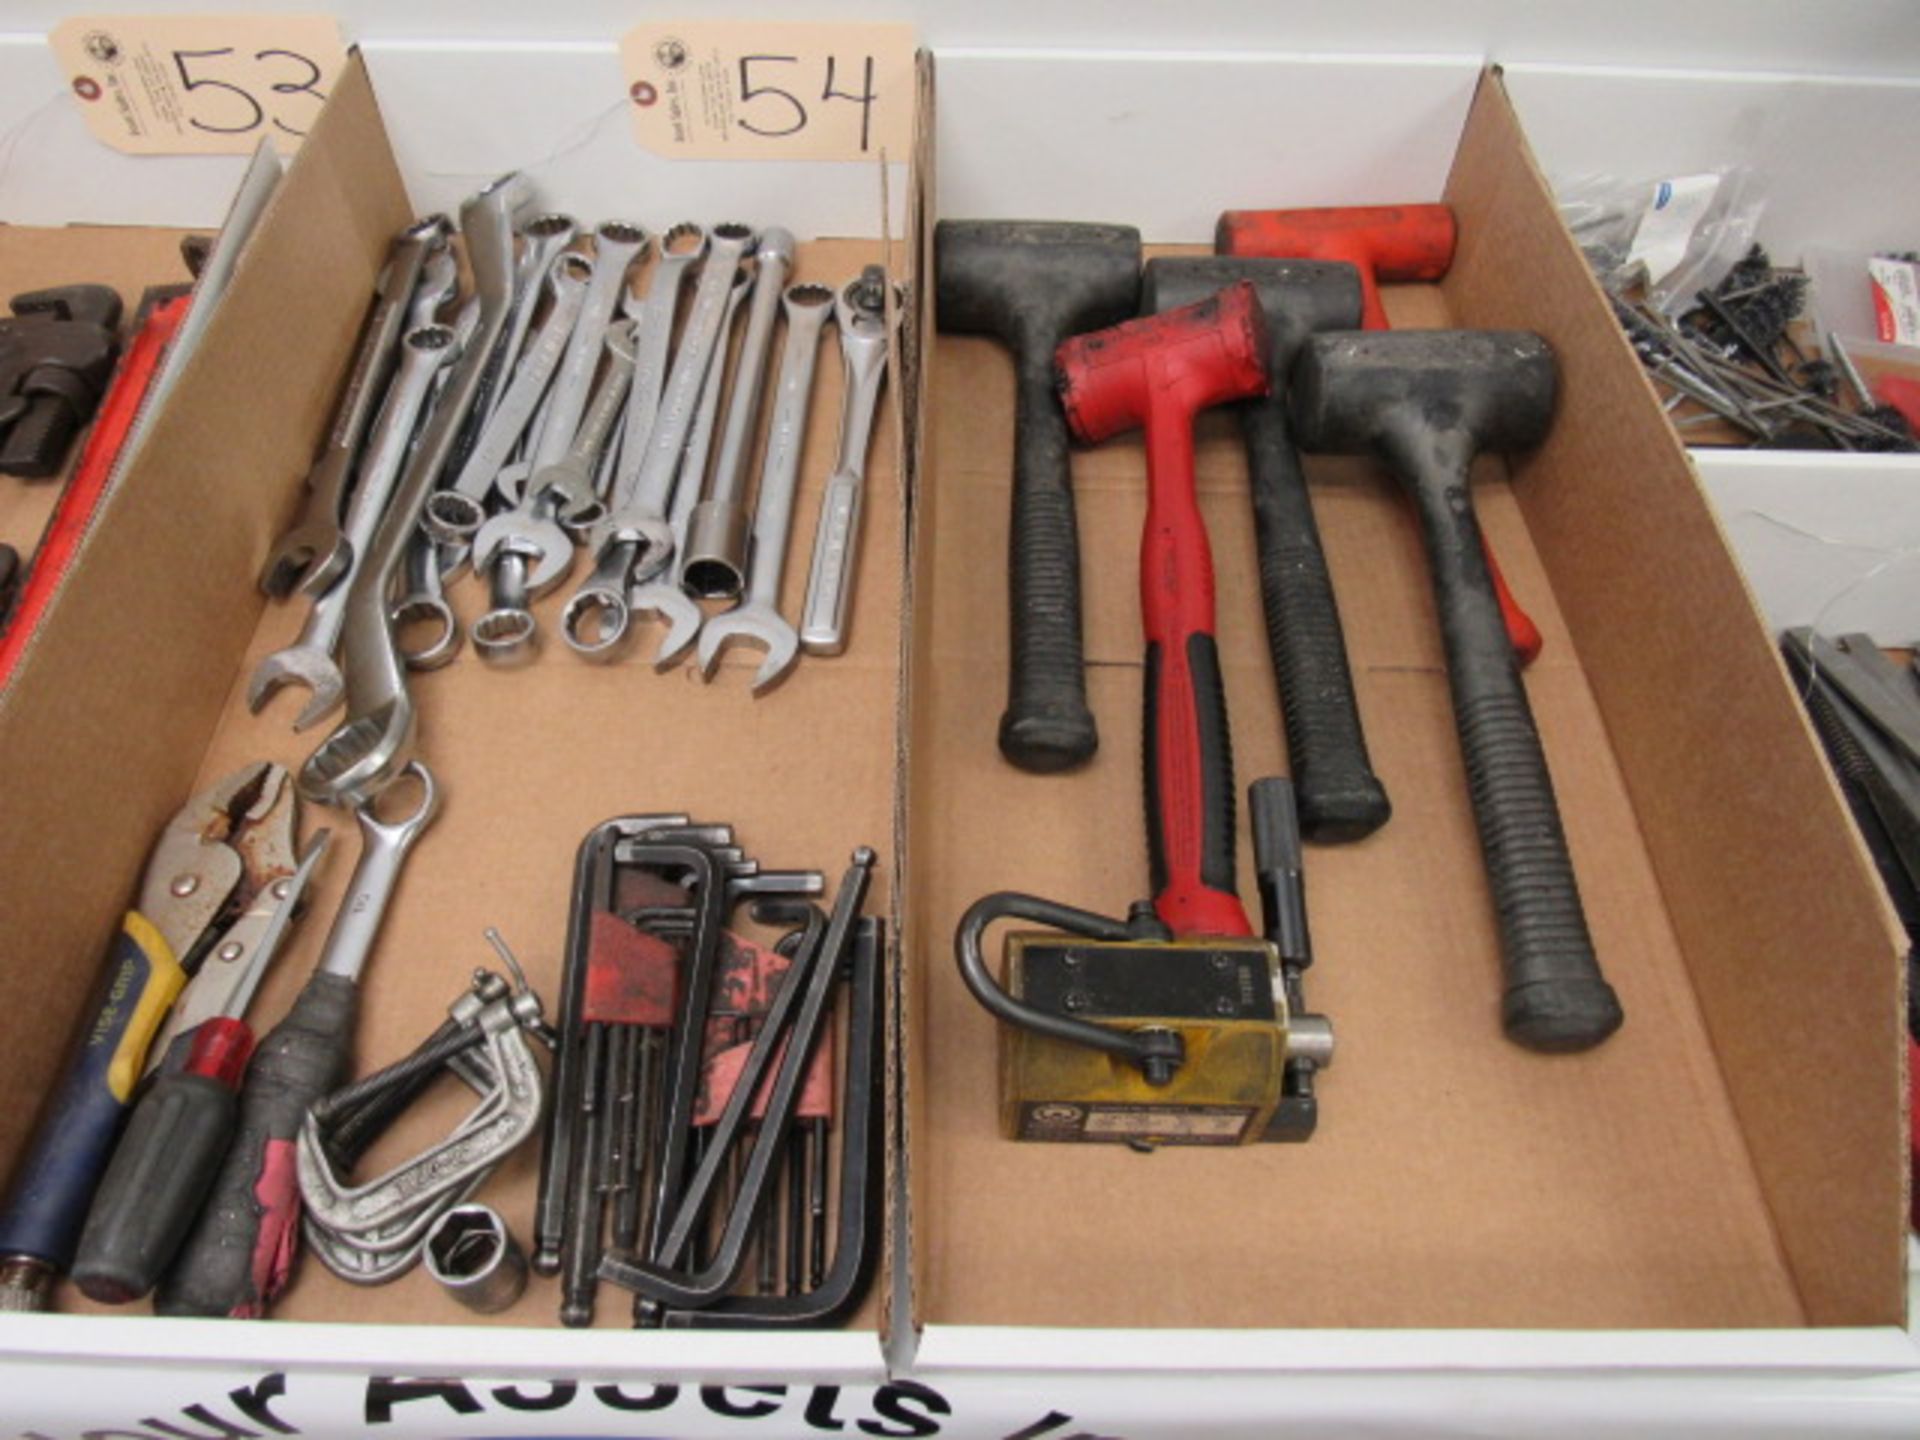 Wrenches & Hammers (2 Boxes)